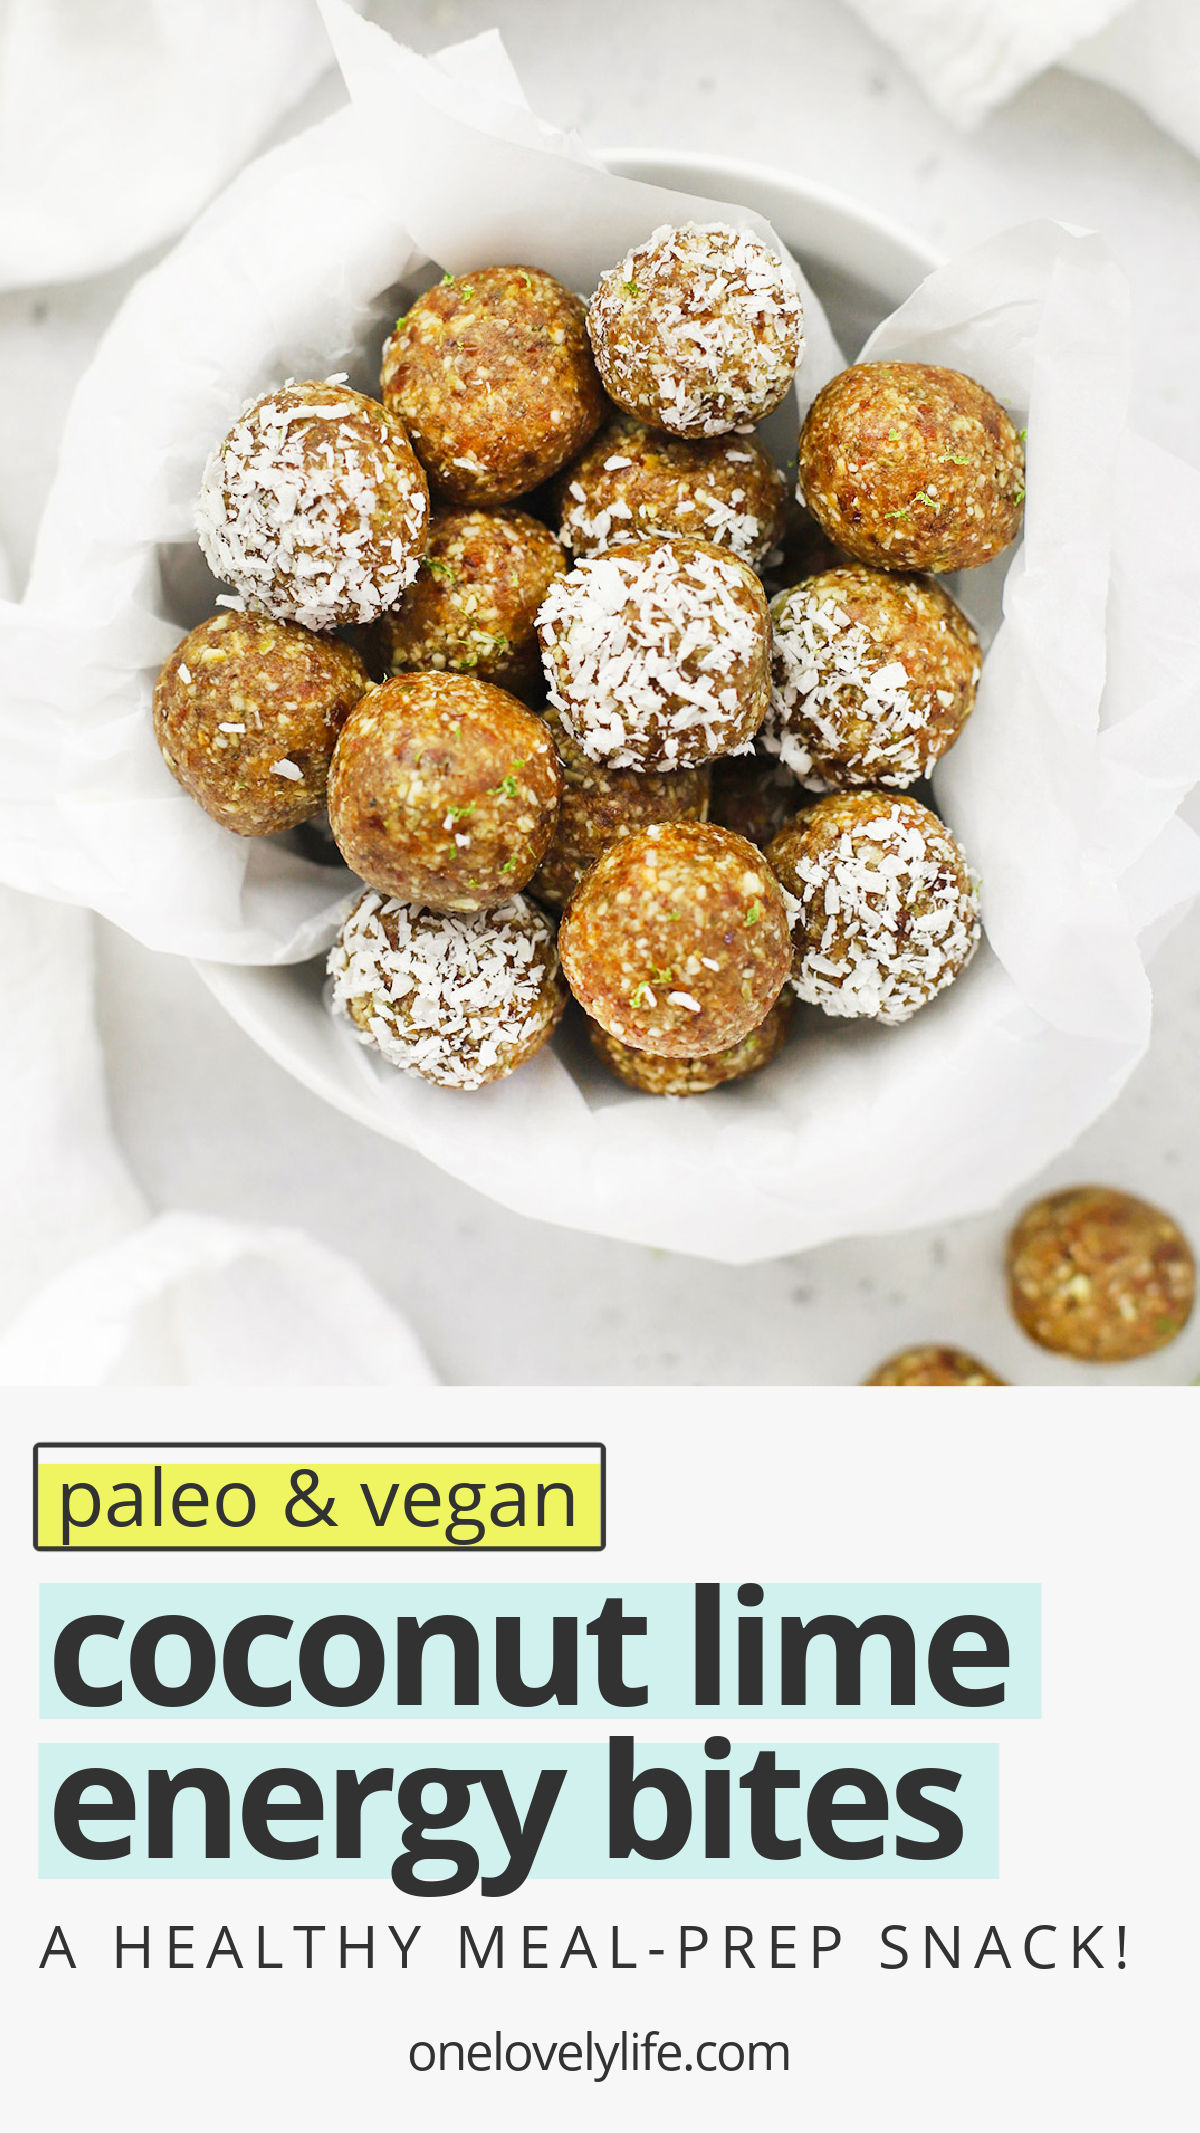 Coconut Lime Energy Bites - These nut-free lime energy bites are perfect for meal prep, healthy snacking, or packing in lunches. (Gluten free, vegan, and paleo approved!) // Nut Free snack // Nut free lunch idea // Nut free energy bites //